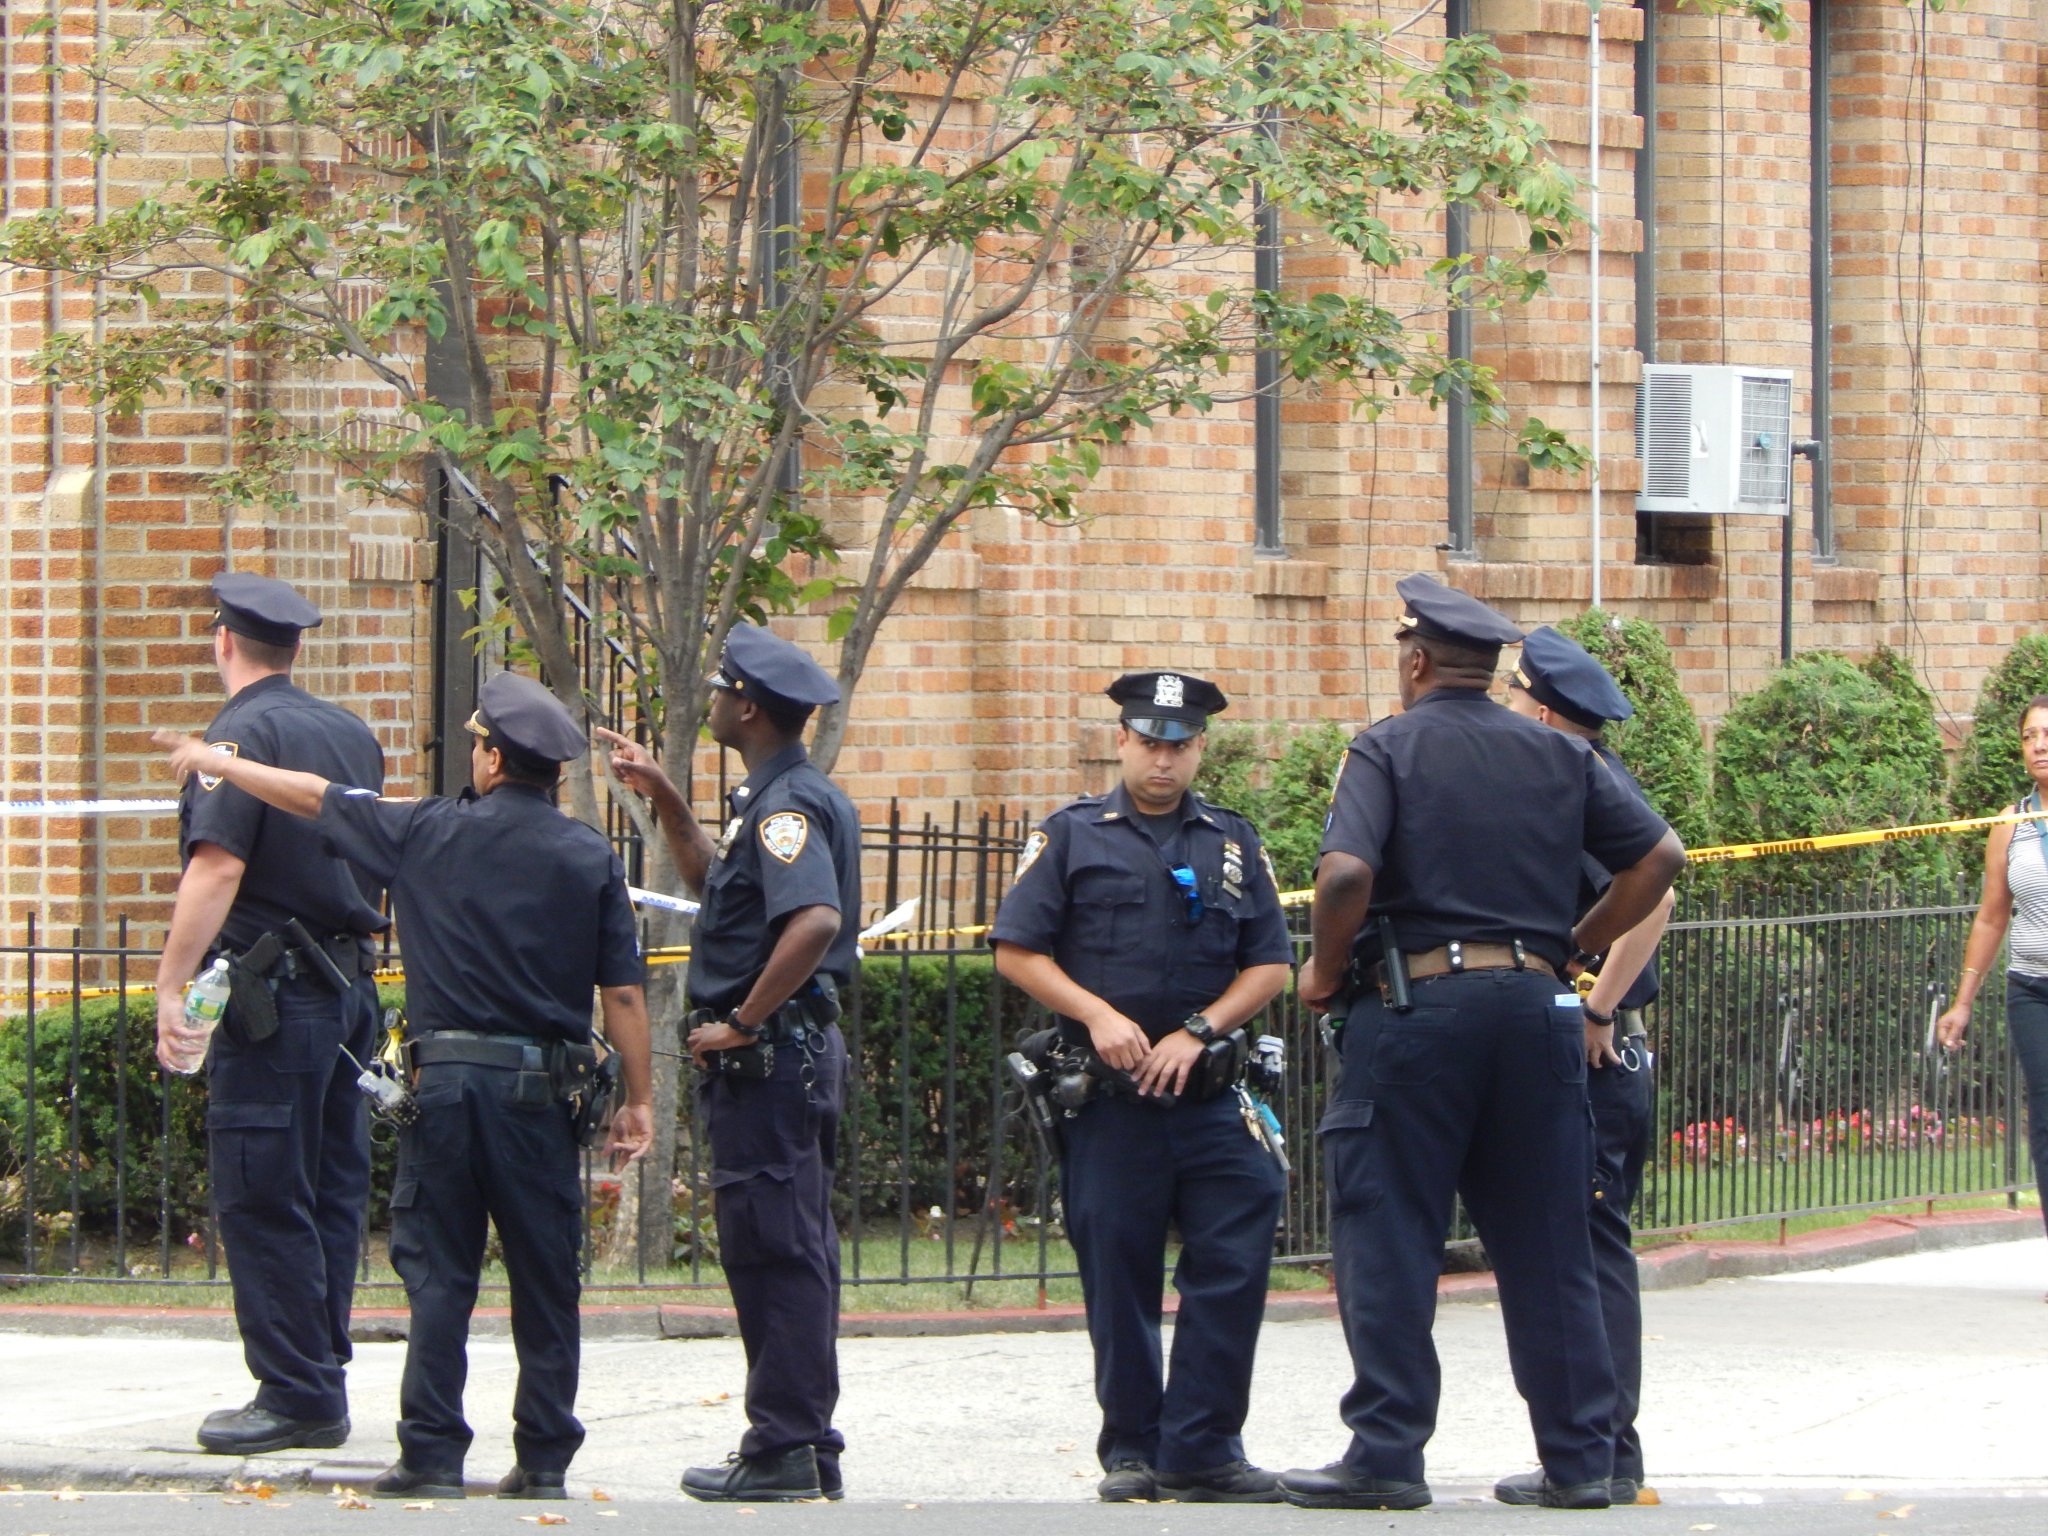 MIDWOOD FLATBUSH NEWS - BROOKLYN TODAY! on Twitter: "NYPD Says Officers